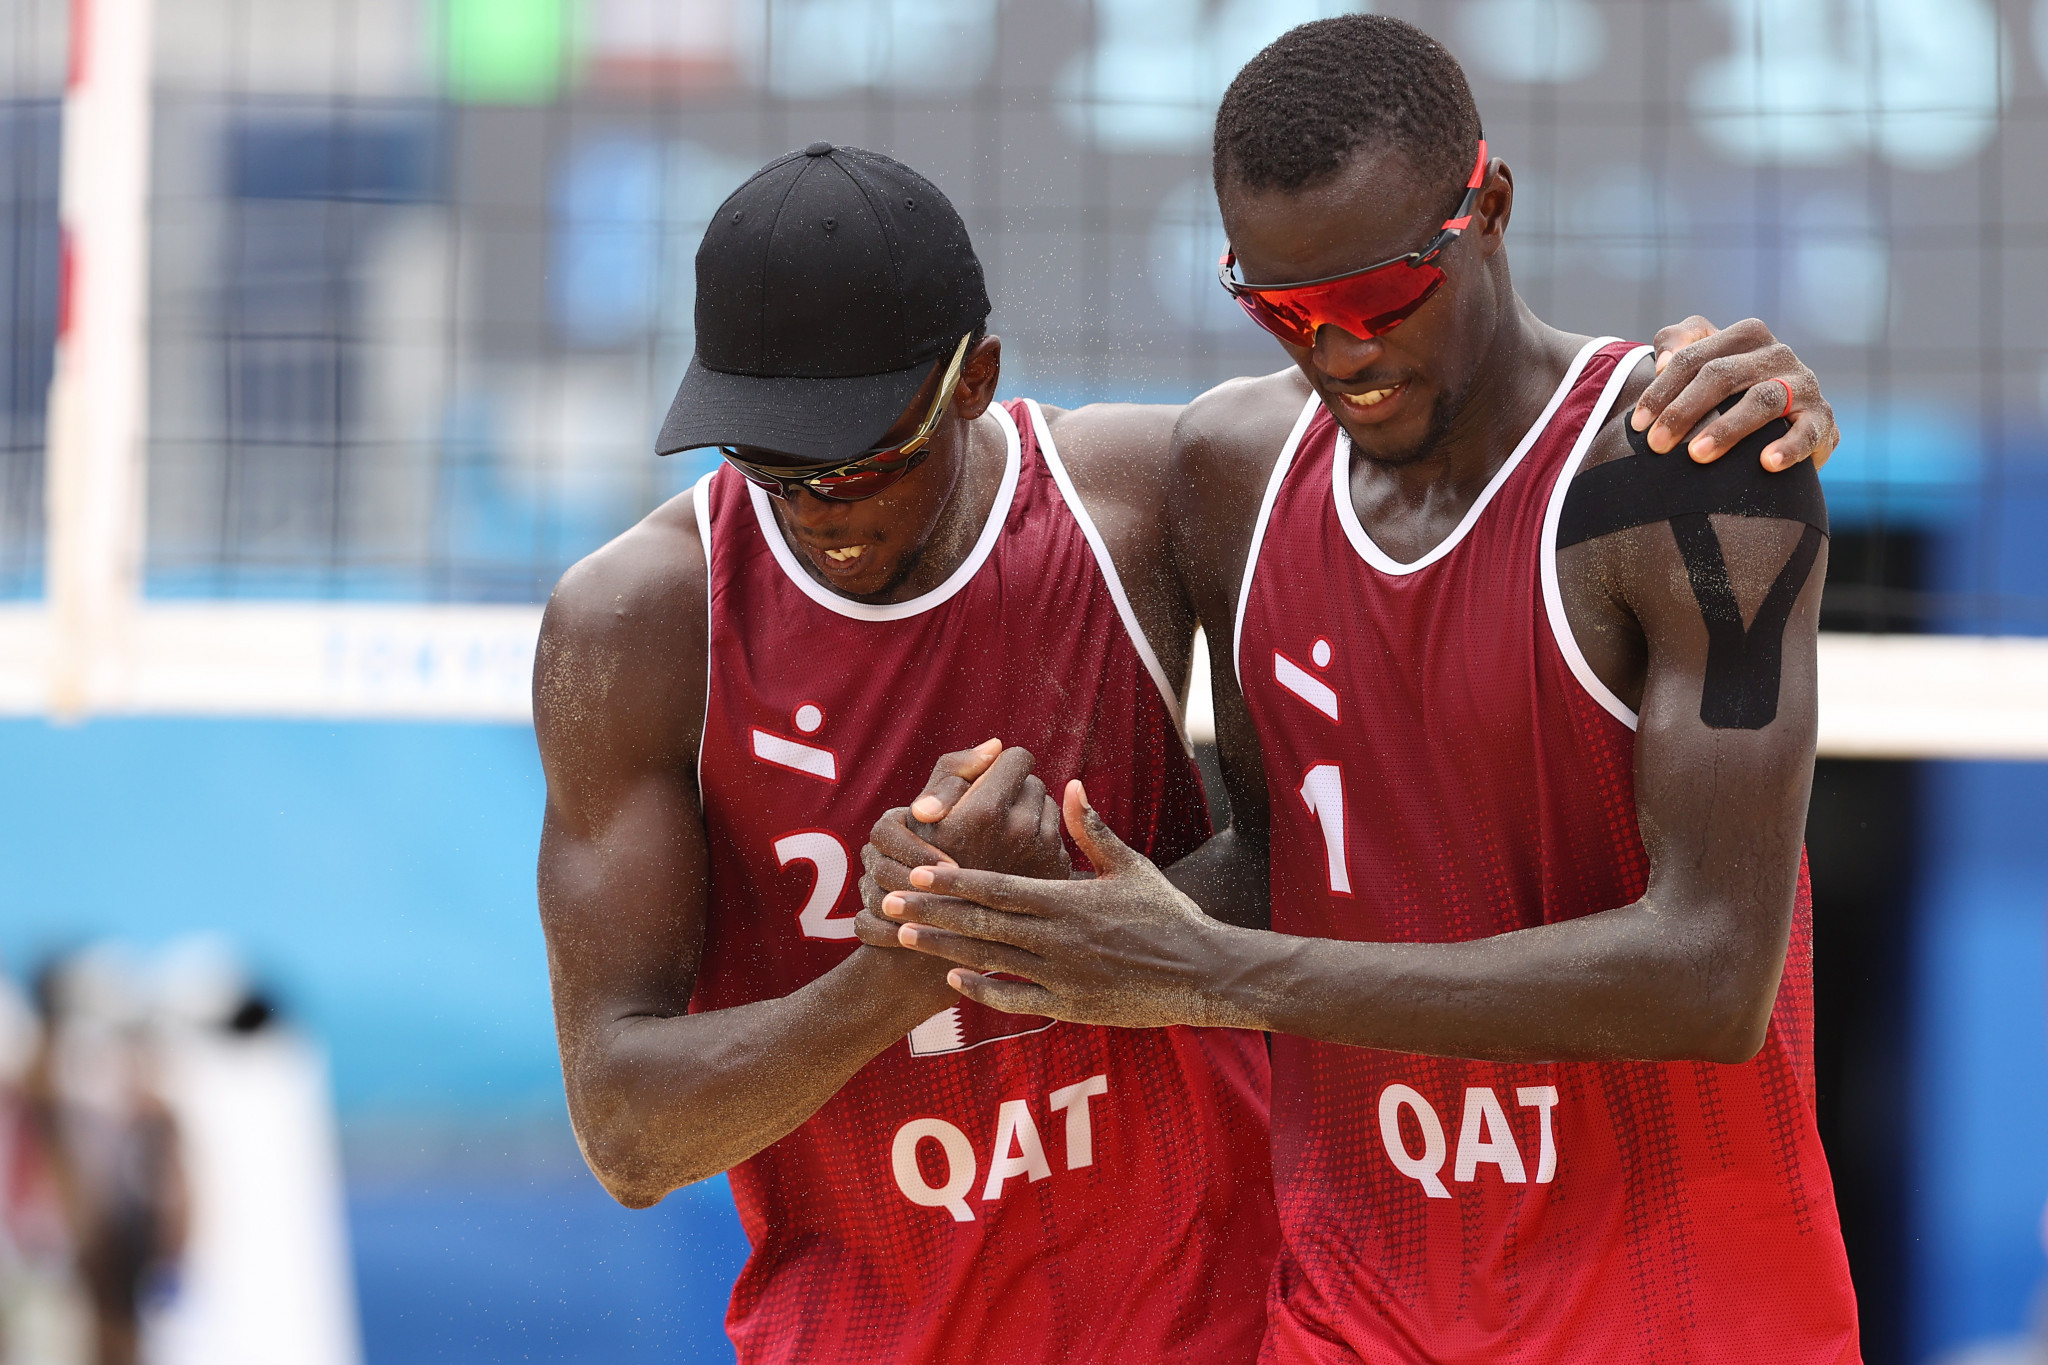 Home favourites earn hard-fought pool wins at Beach Pro Tour Challenge in Doha